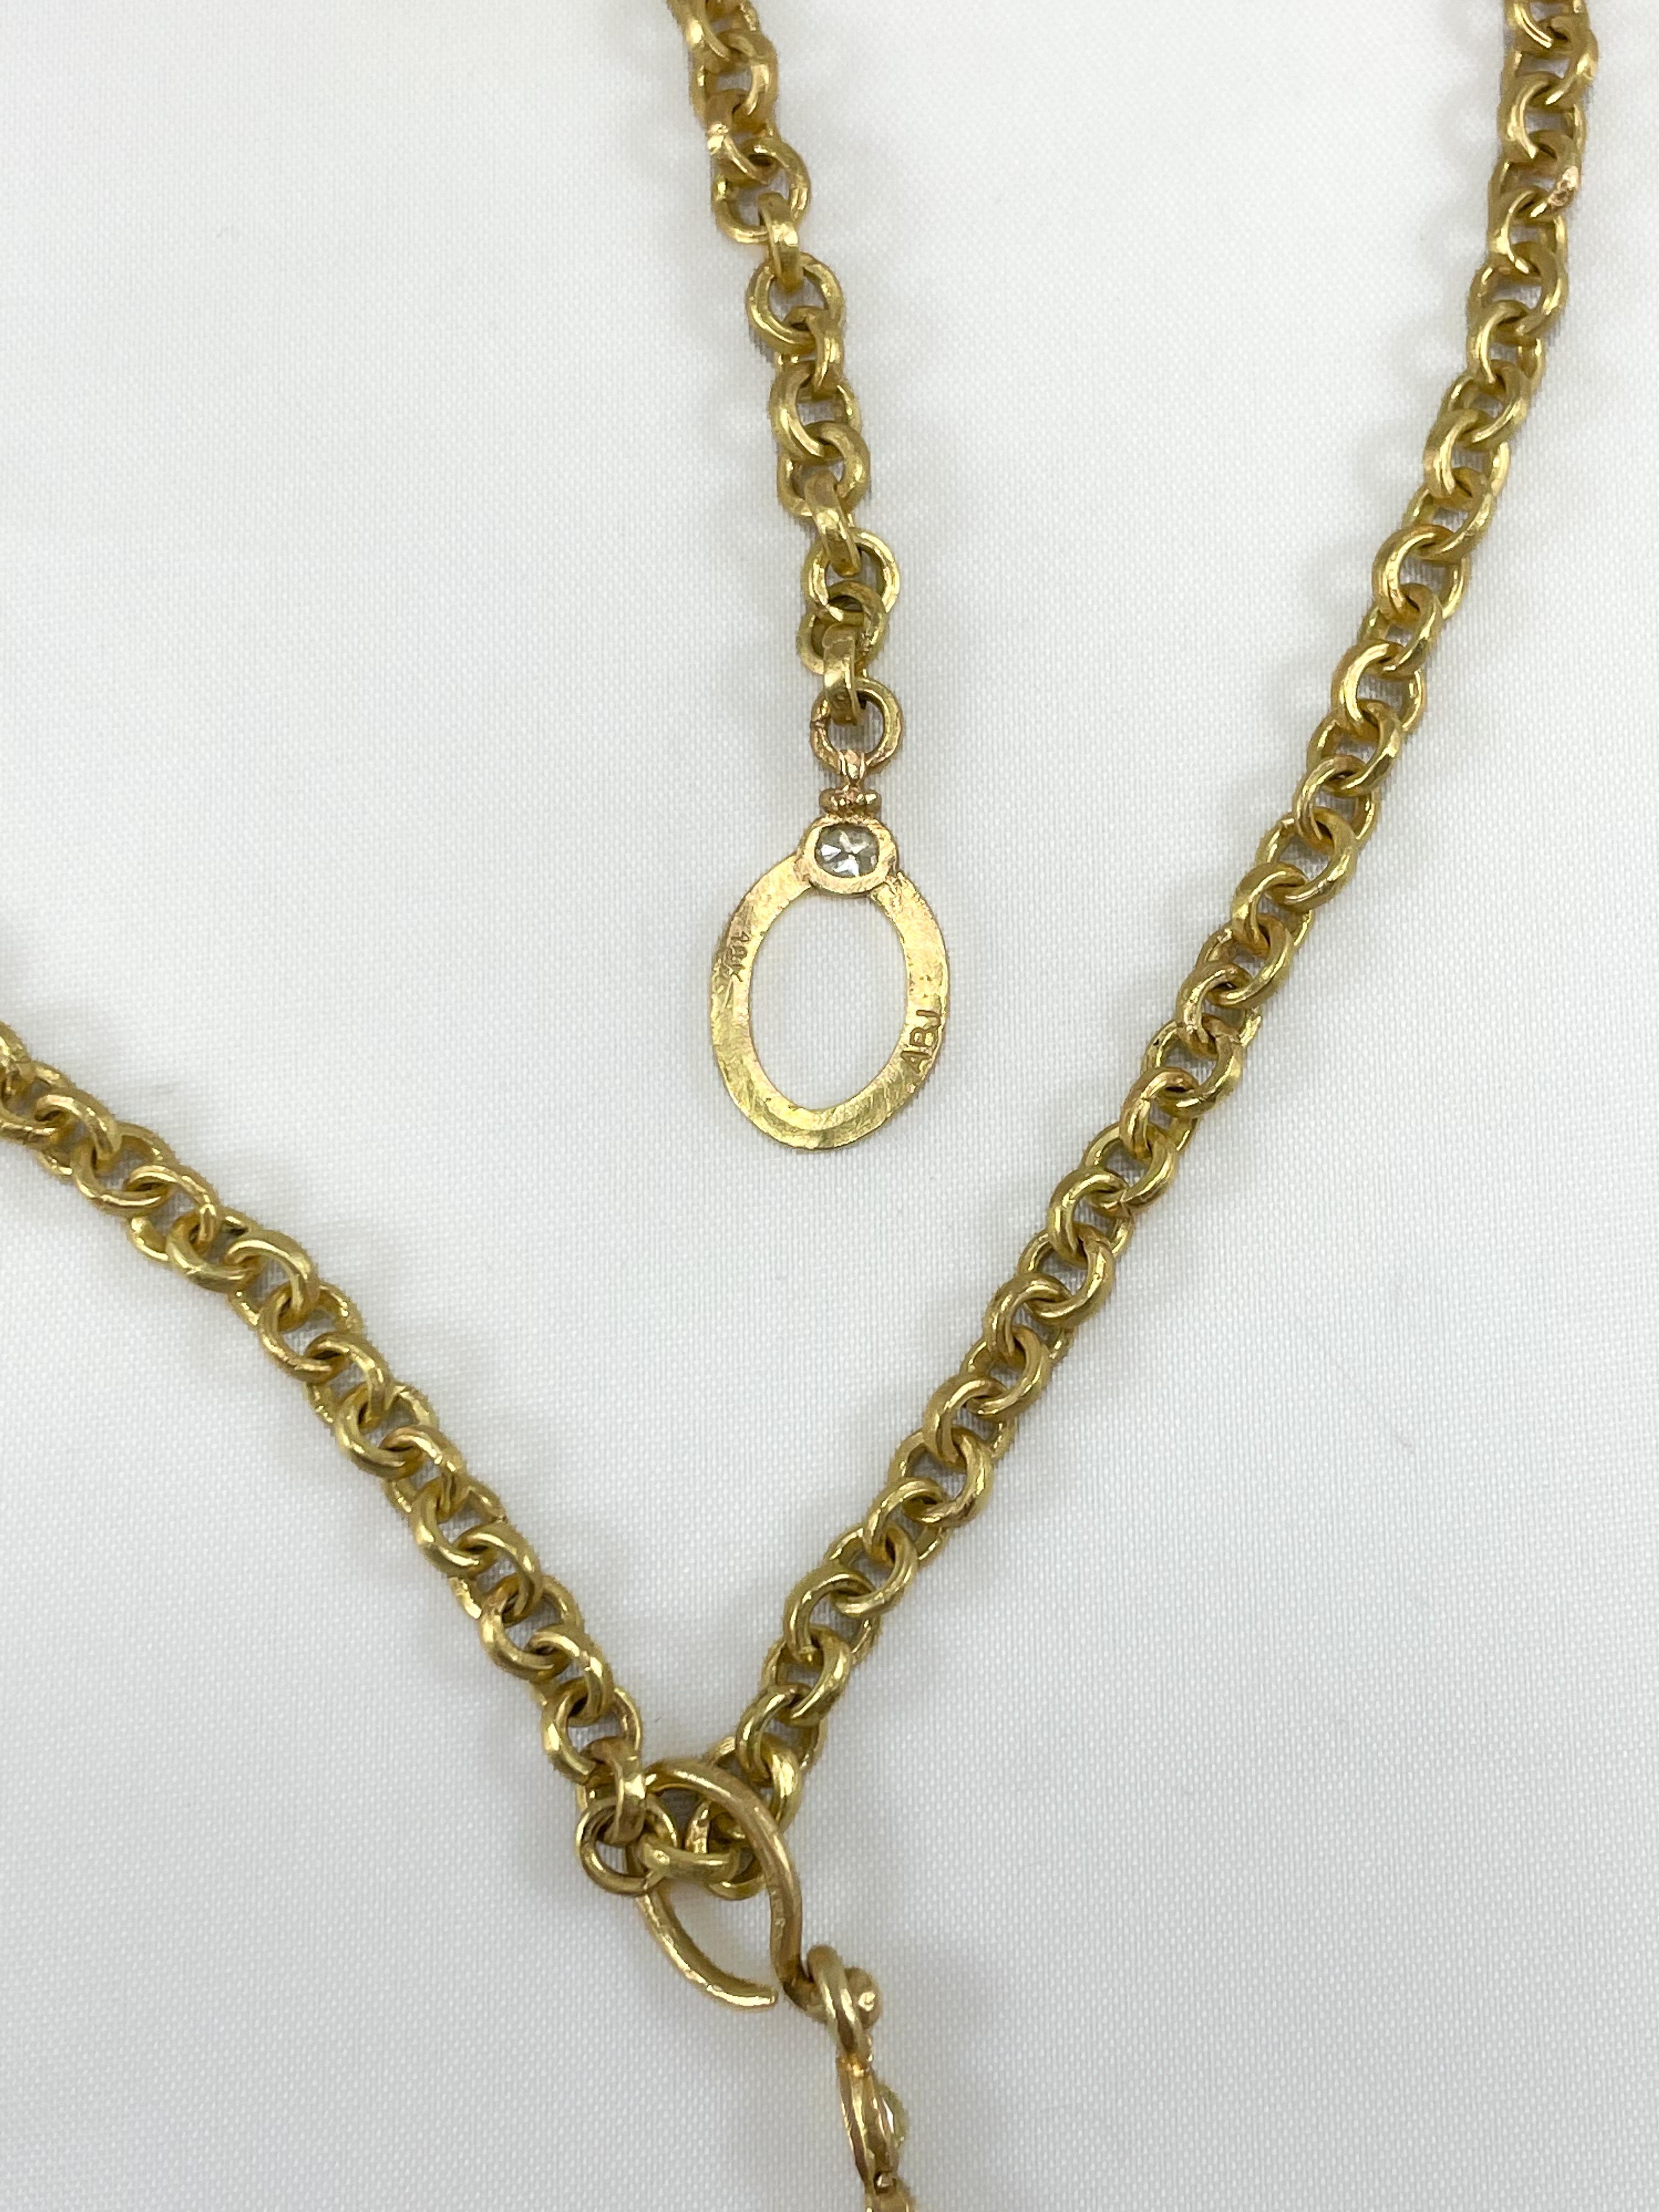 17mm Cream Pearl on 18K Gold Chain Necklace Diamond Enhancer and Toggle Clasp For Sale 1